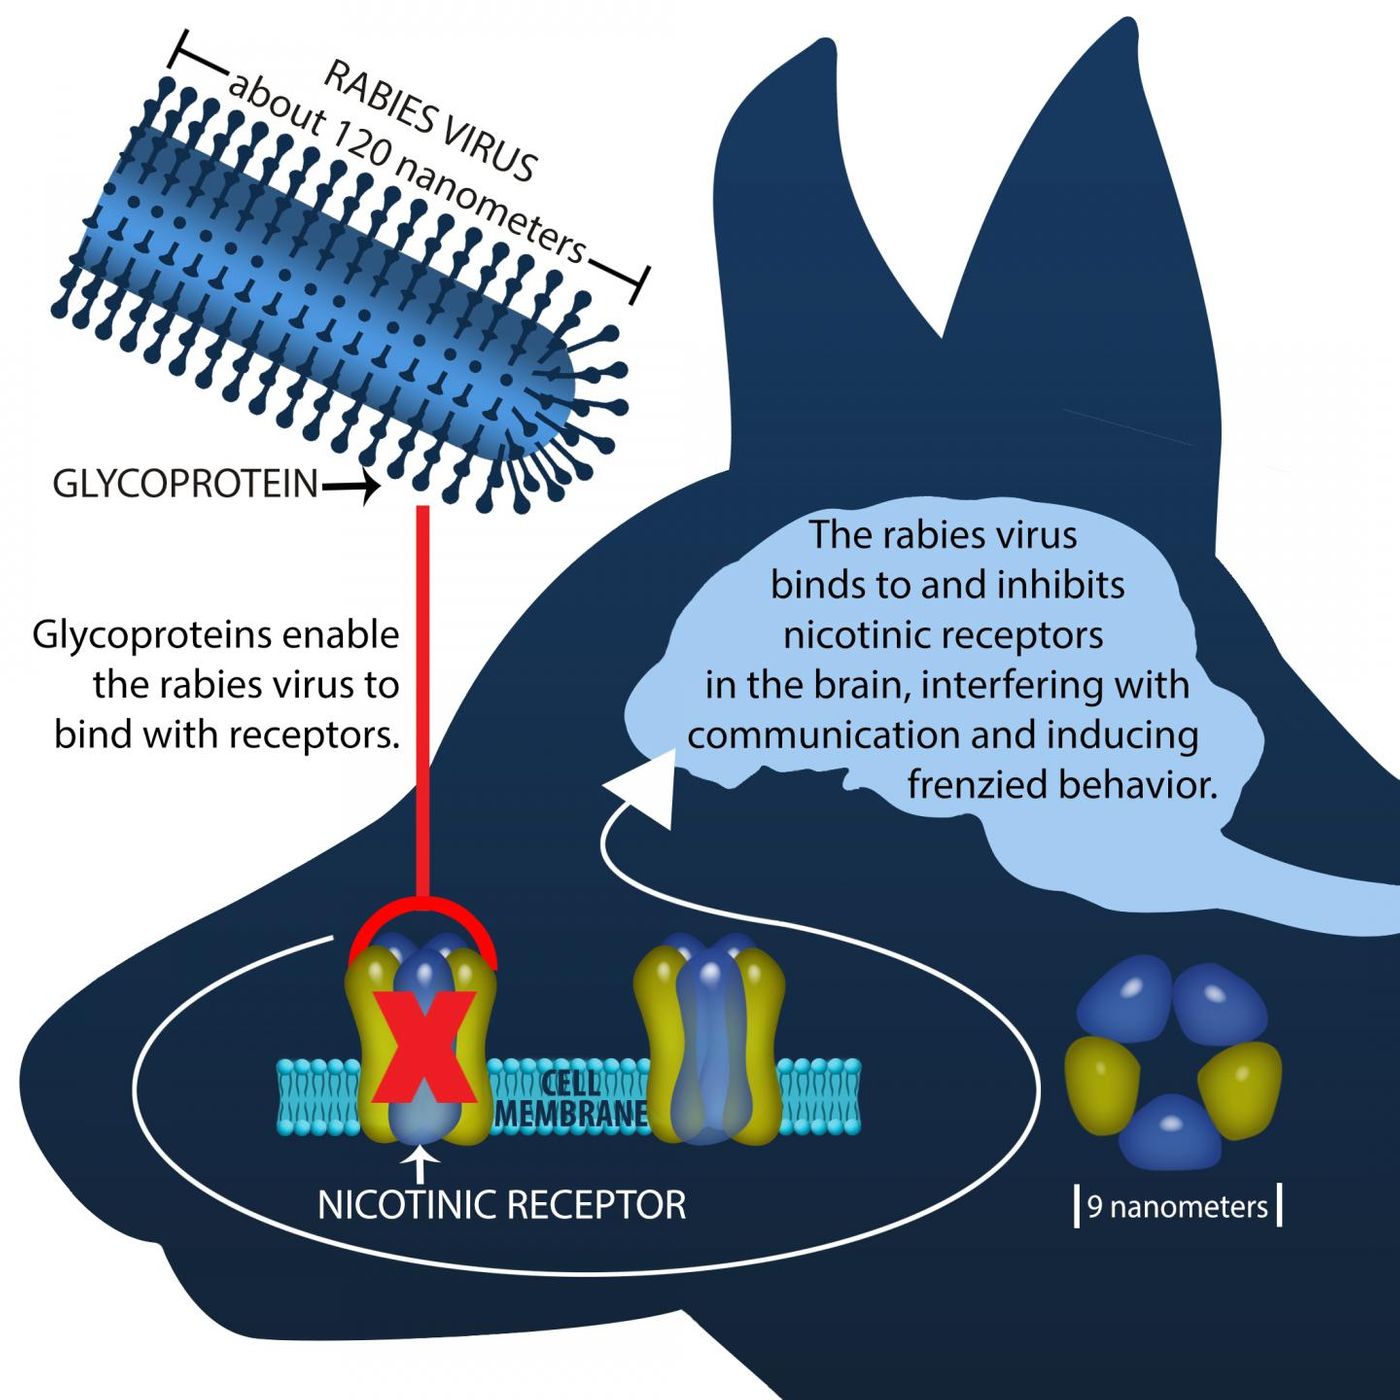 This illustration shows how the rabies virus inhibits nicotinic receptors in the brain, which interferes with communication and induces frenzied behavior. / Credit: Illustration by Meghan Murphy.